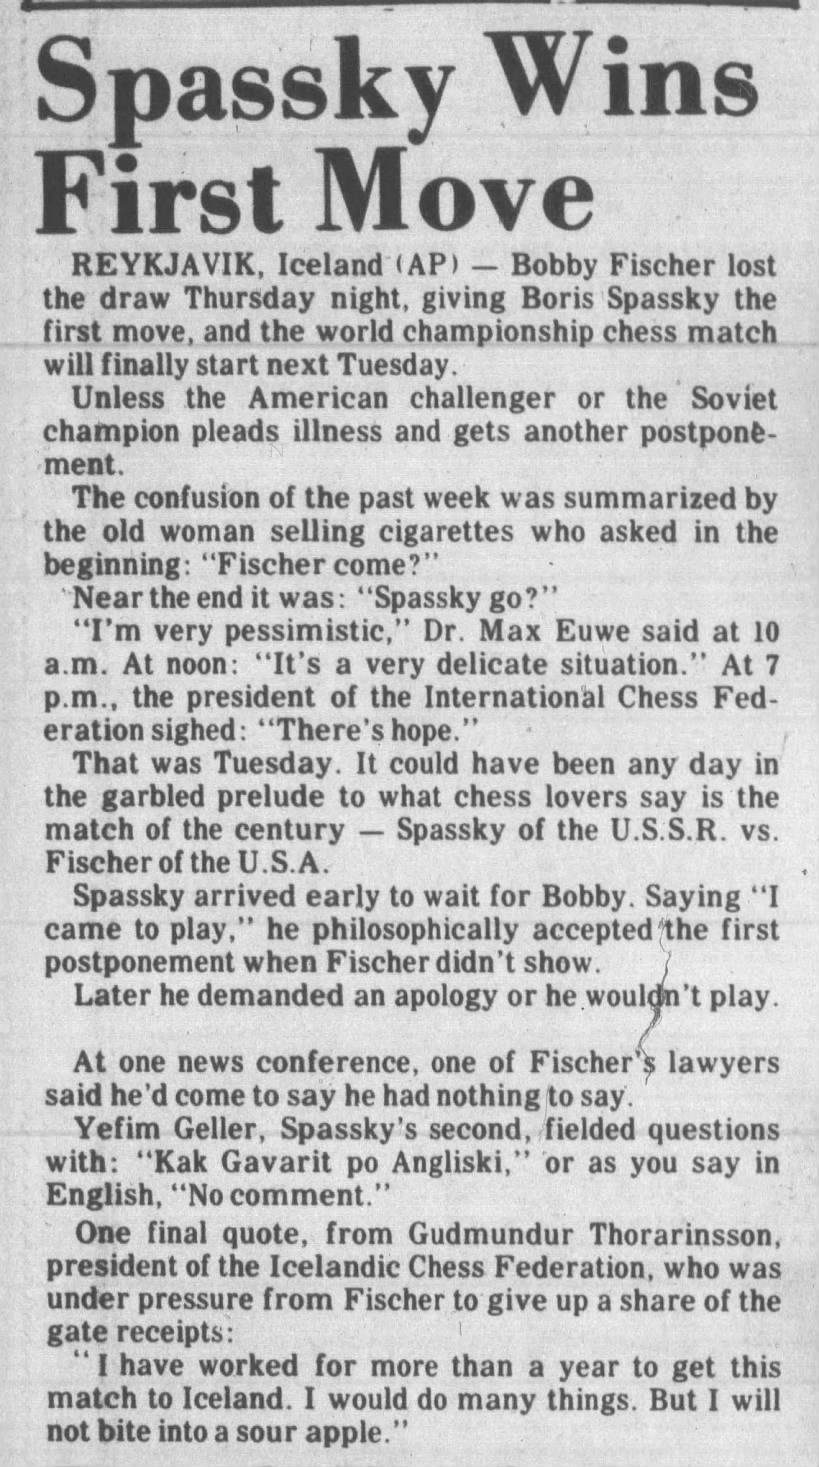 Spassky Wins First Move